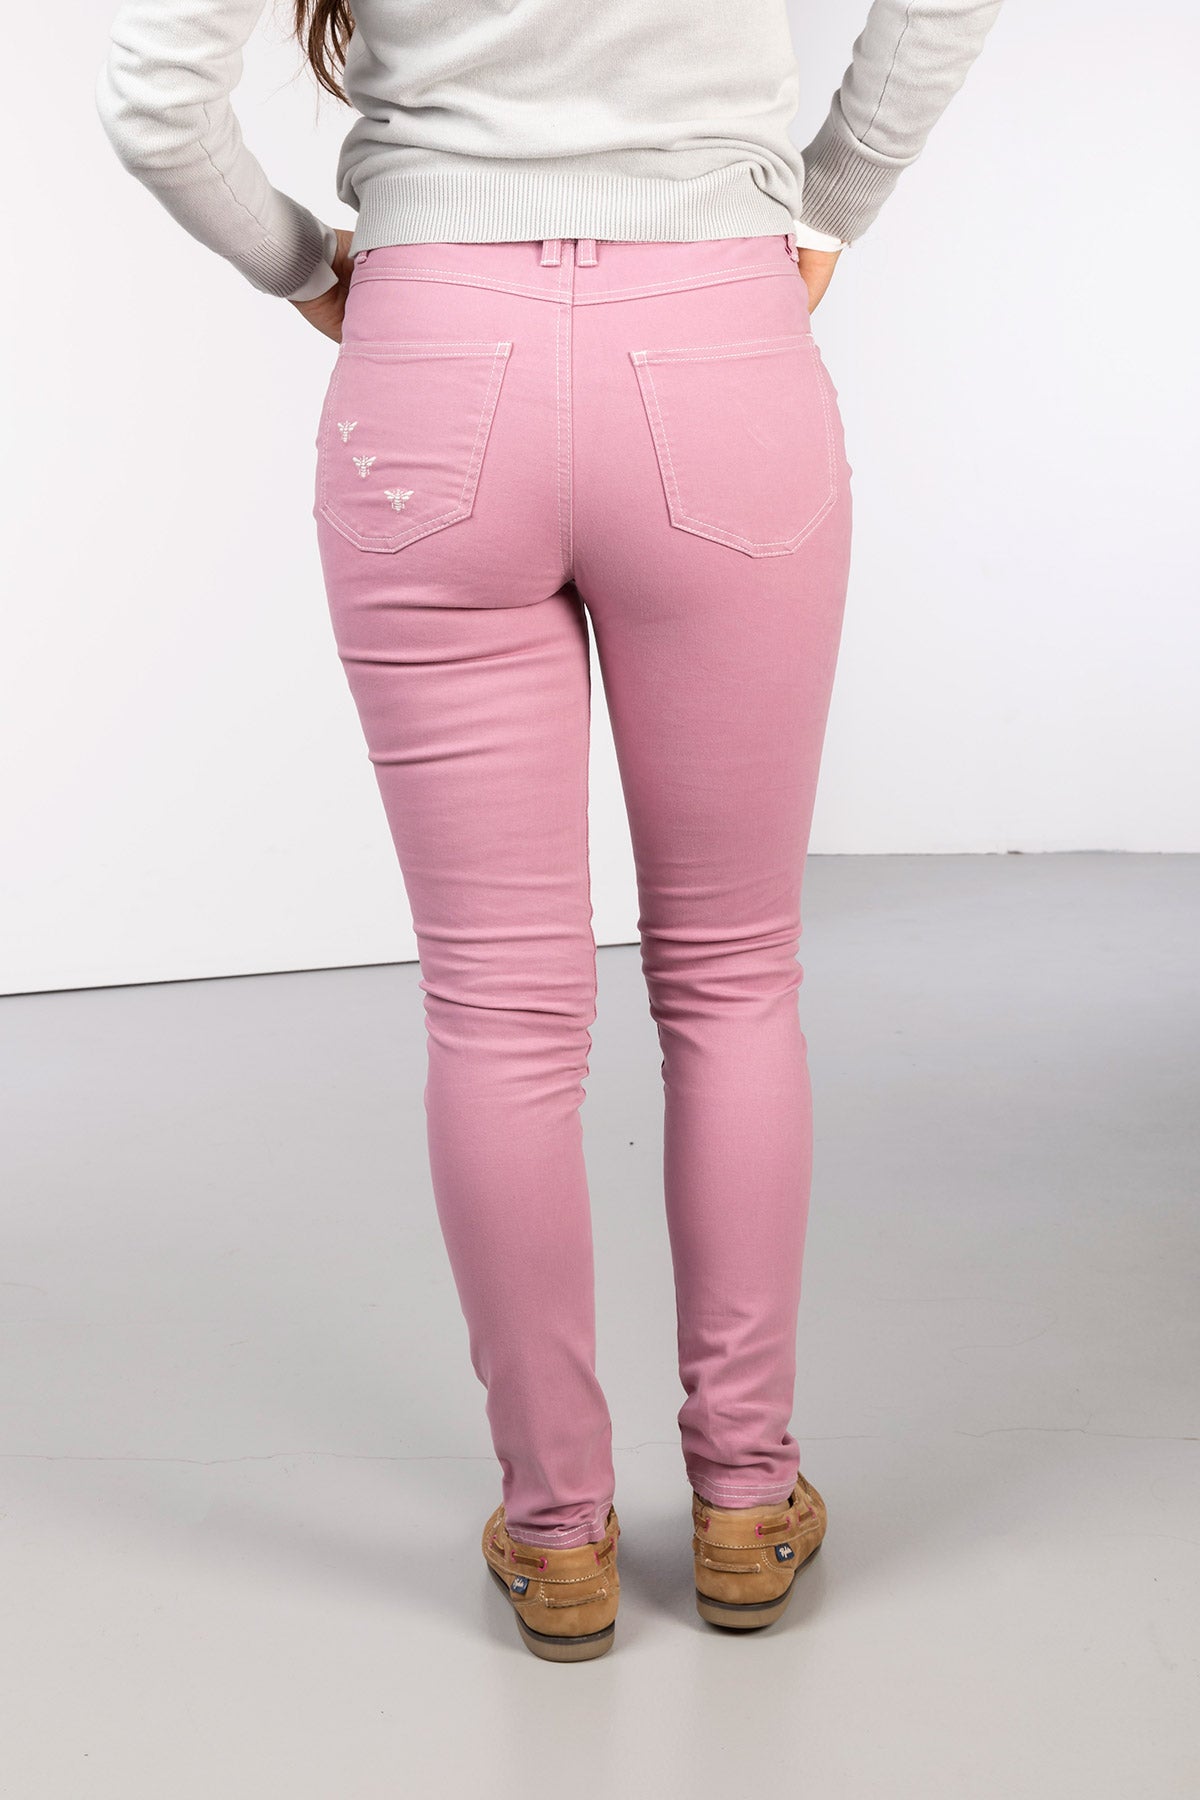 Ladies Embroidered Jeans UK | High Waisted Jeans | Rydale